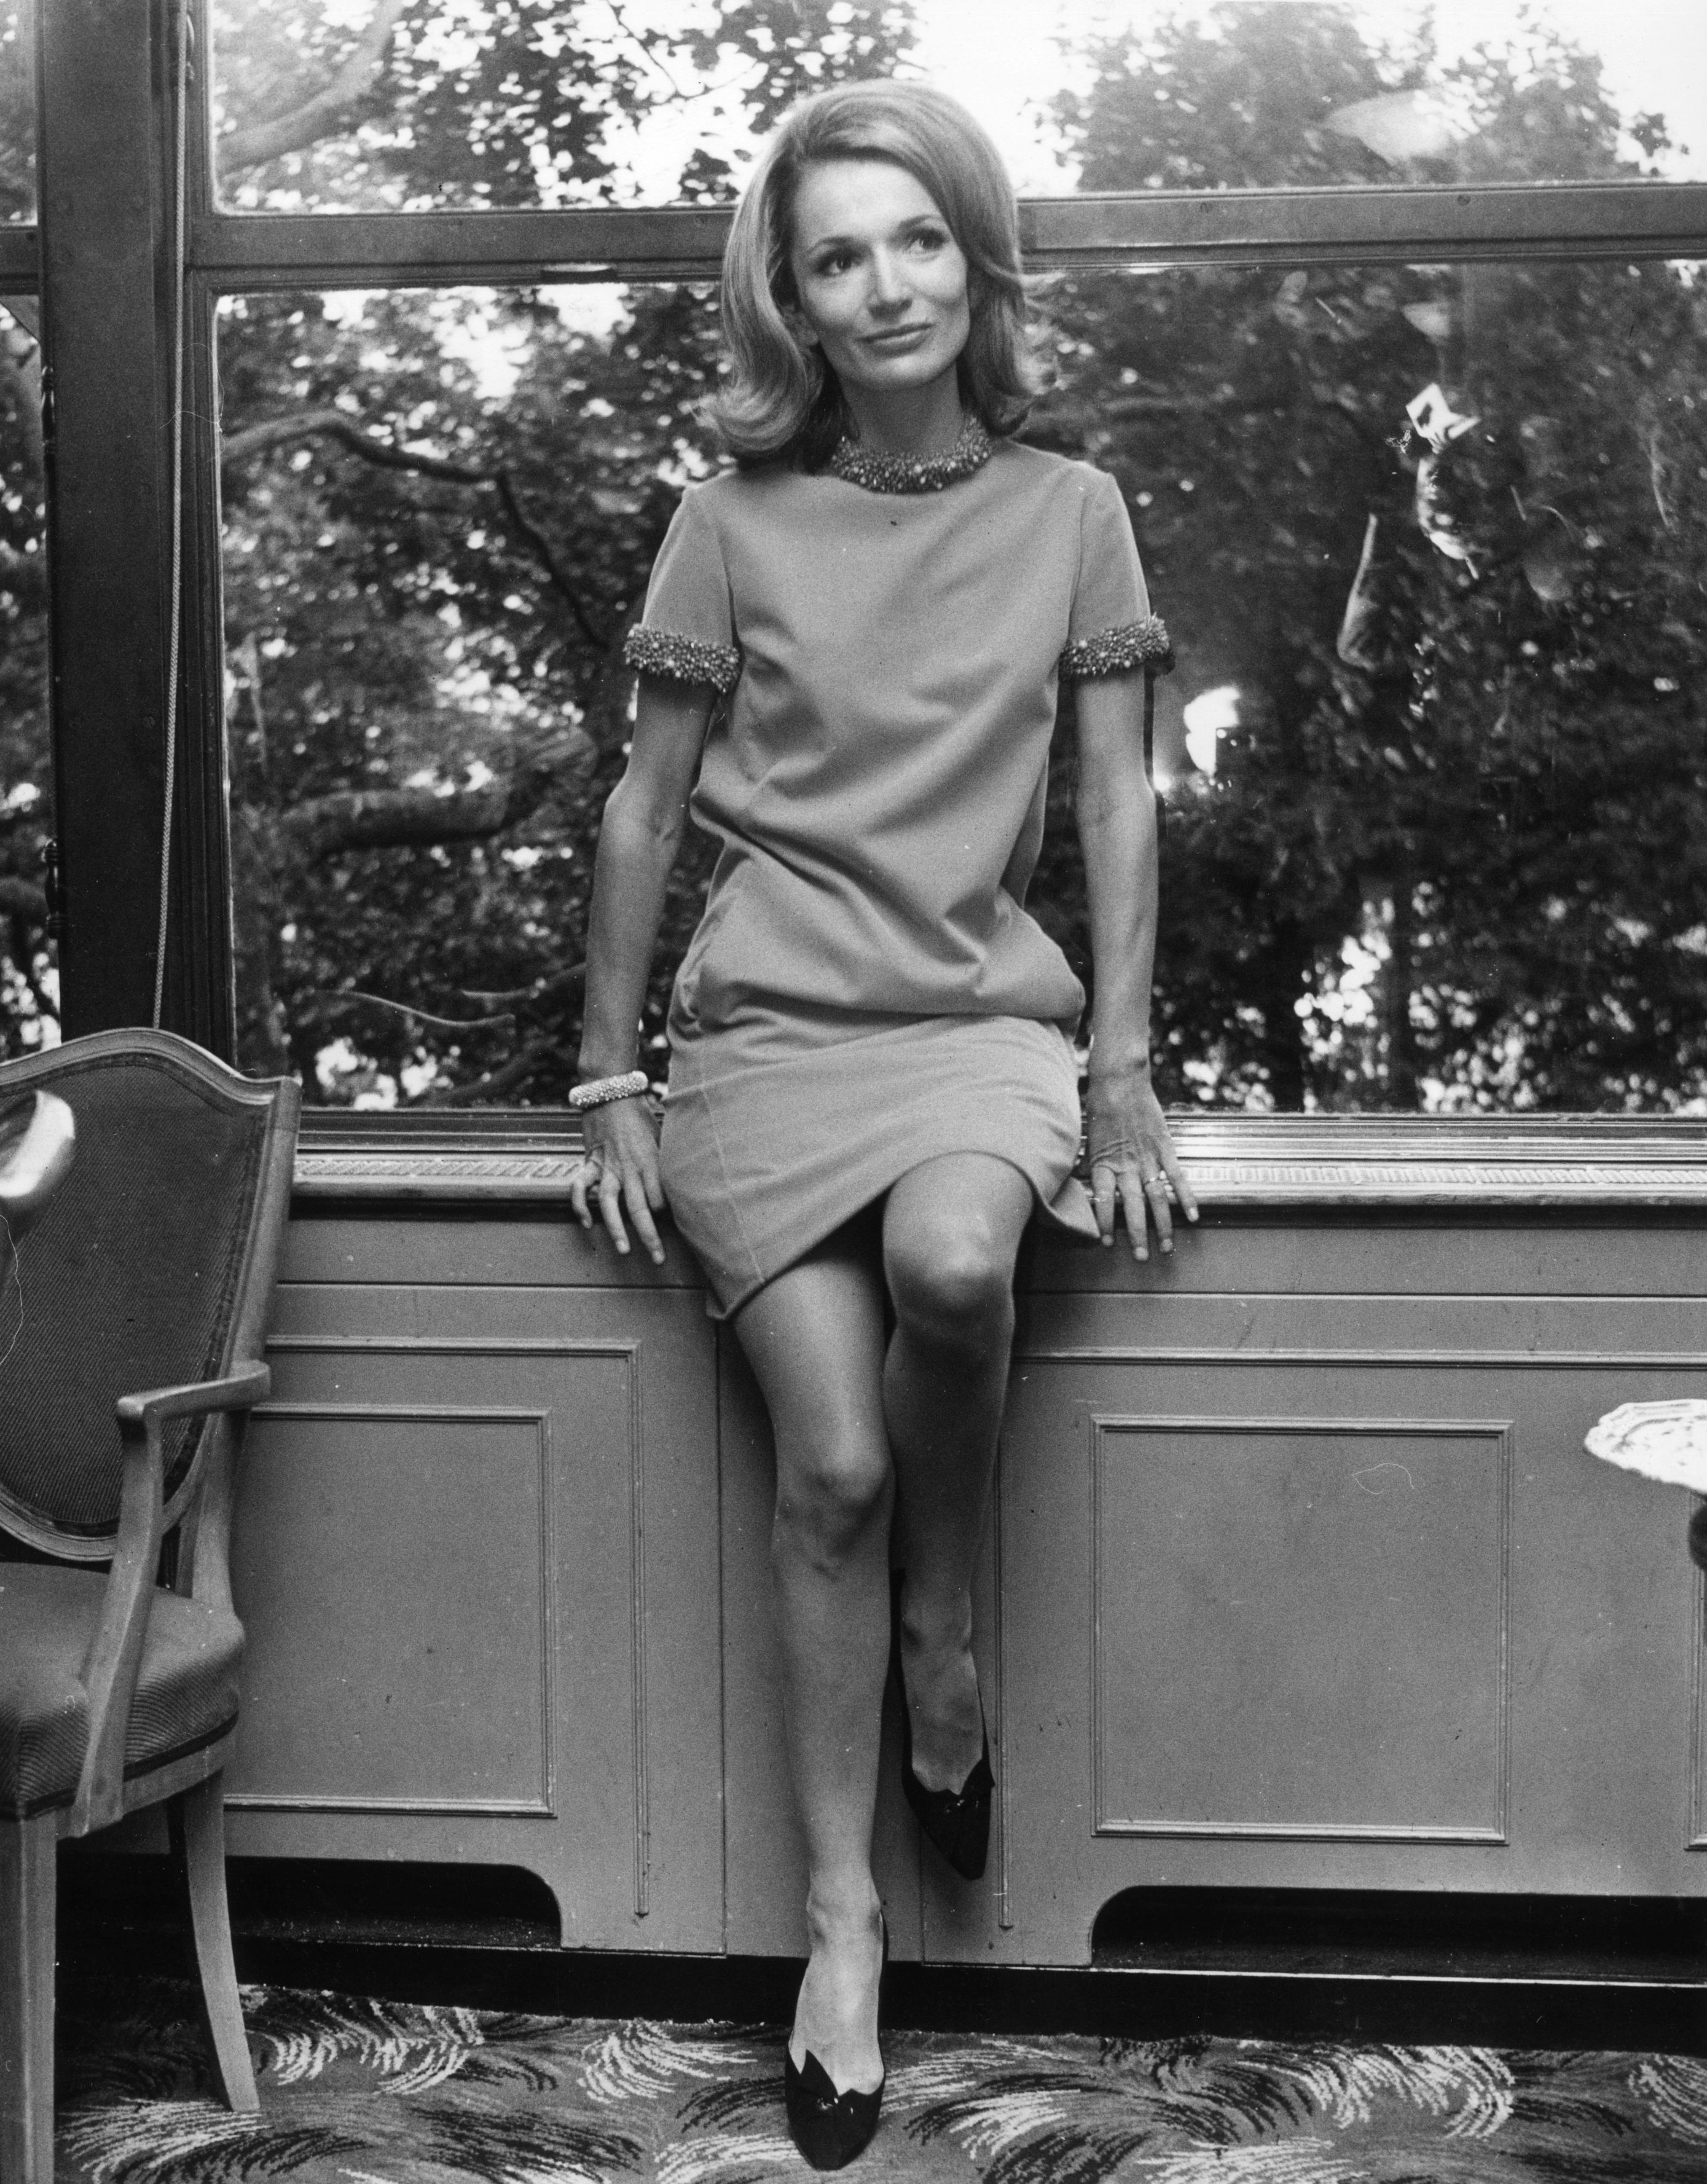 Lee Radziwill at London's Savoy Hotel | Photo: Getty Images